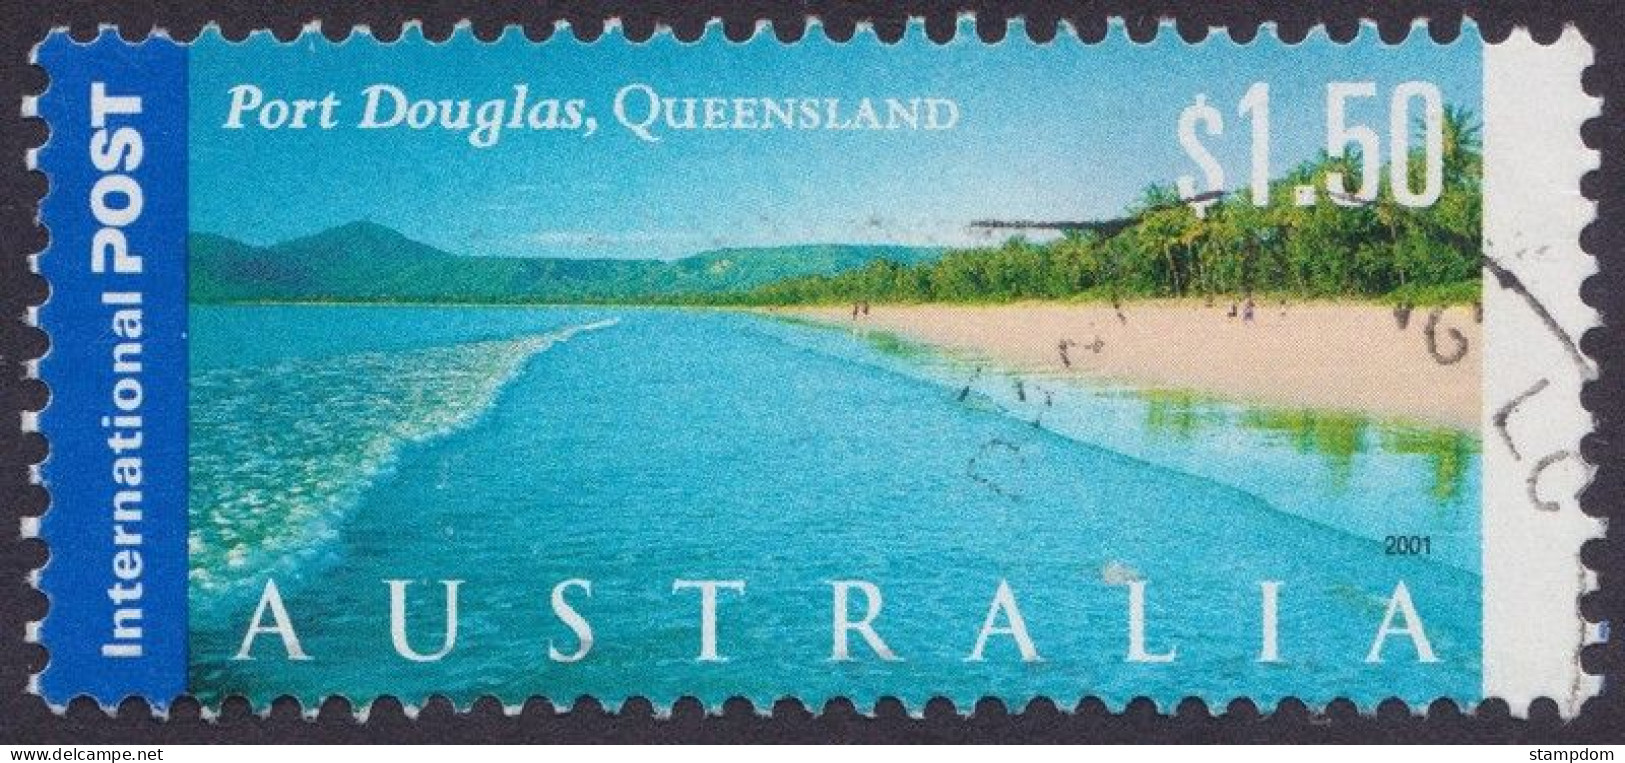 AUSTRALIA 2001 Tourist Attractions $1.50 Port Douglas Sc#1981 USED @O383 - Used Stamps